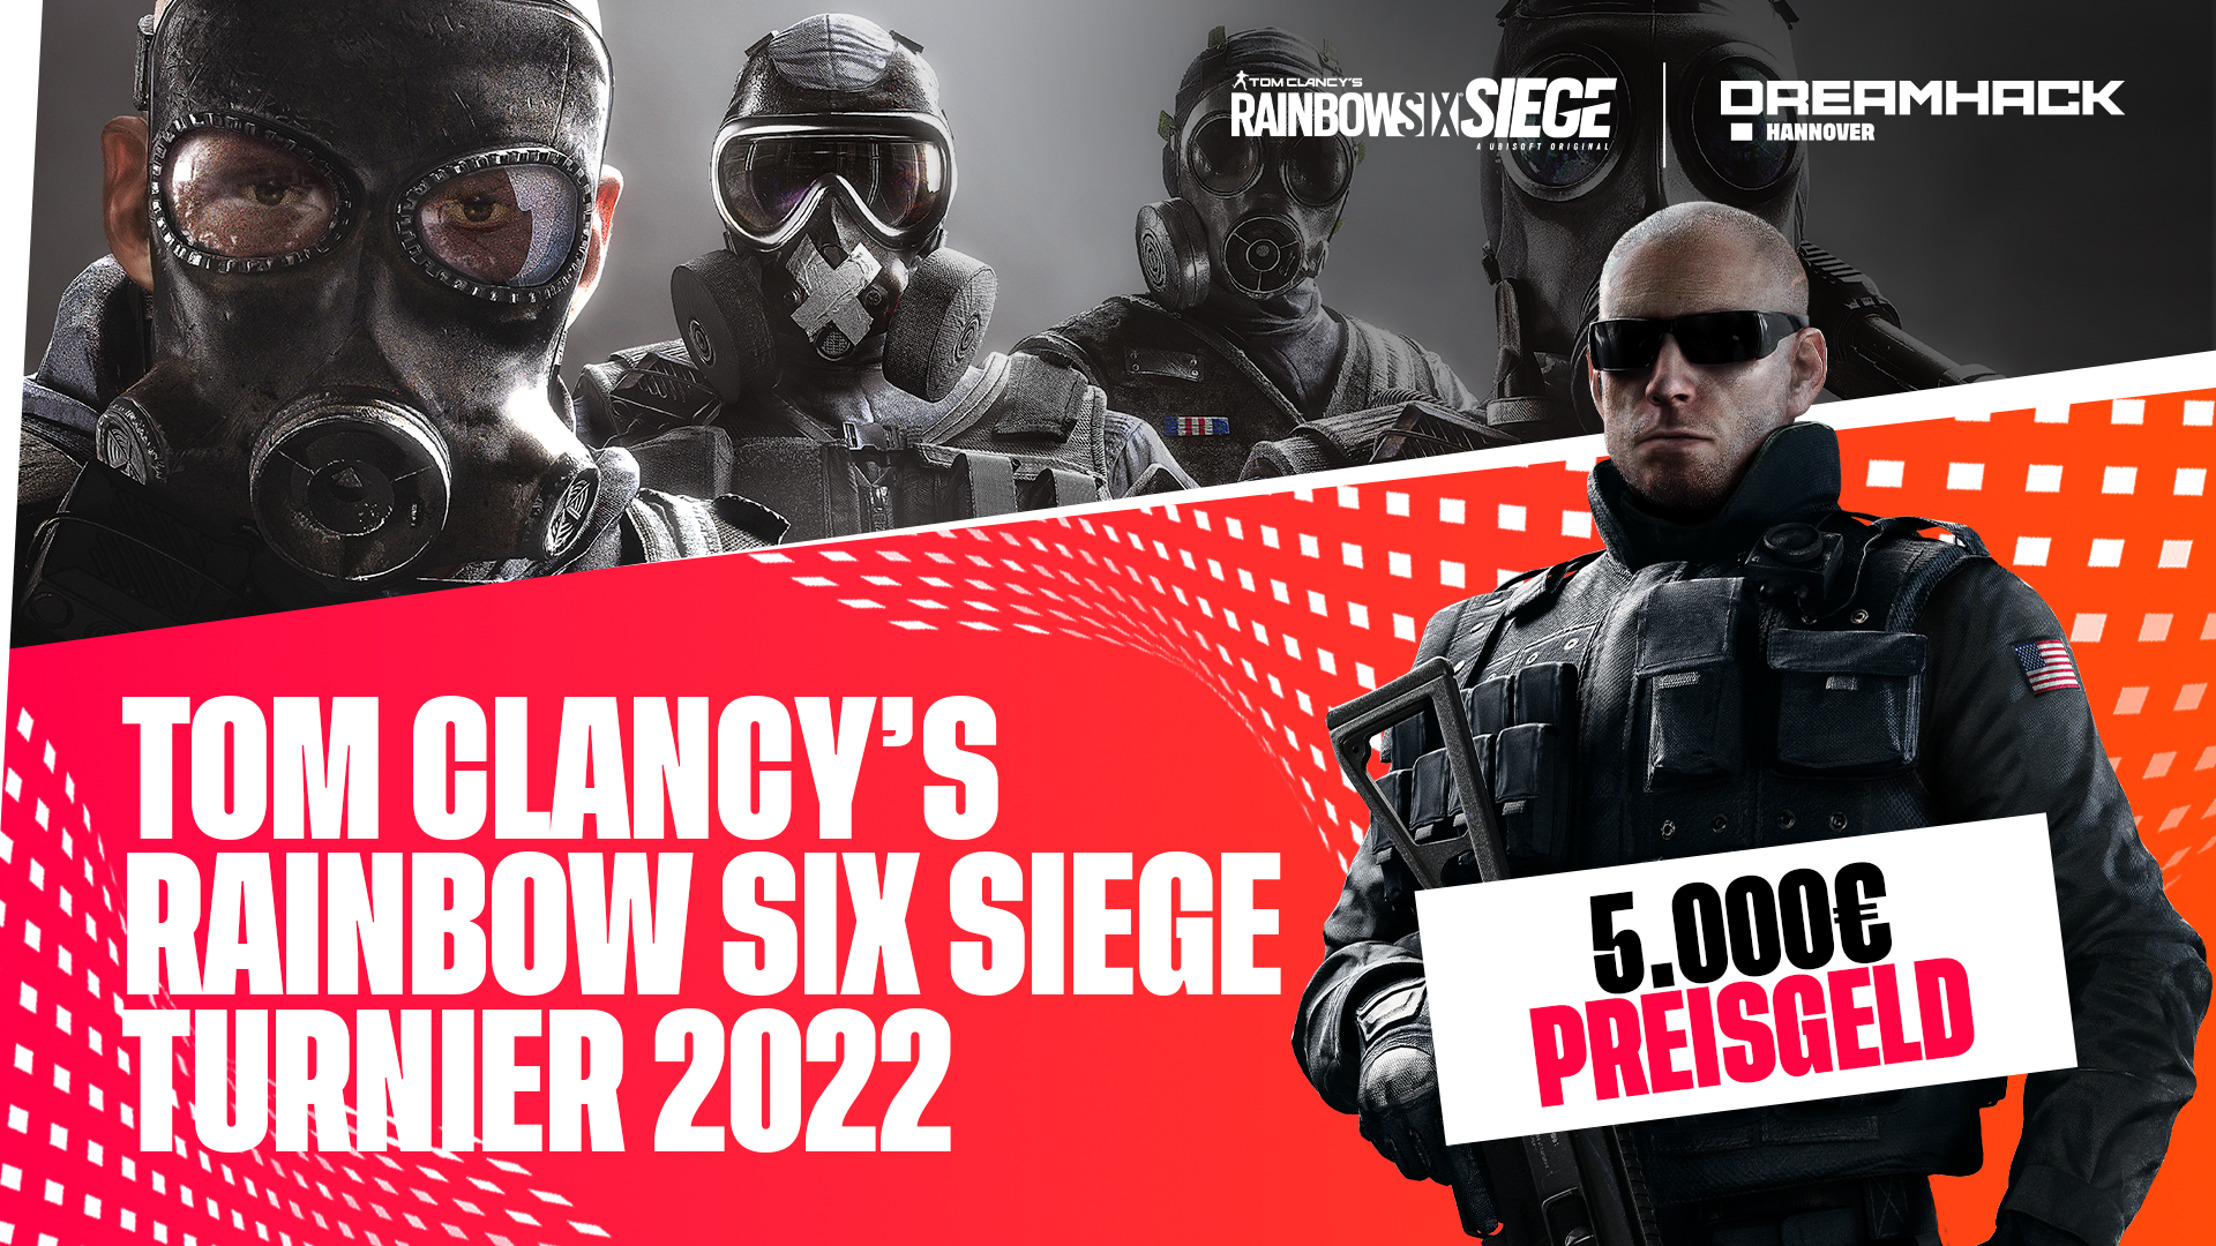 Preview: Großes Tom Clancy’s Rainbow Six Siege auf der DreamHack 2022 in Hannover